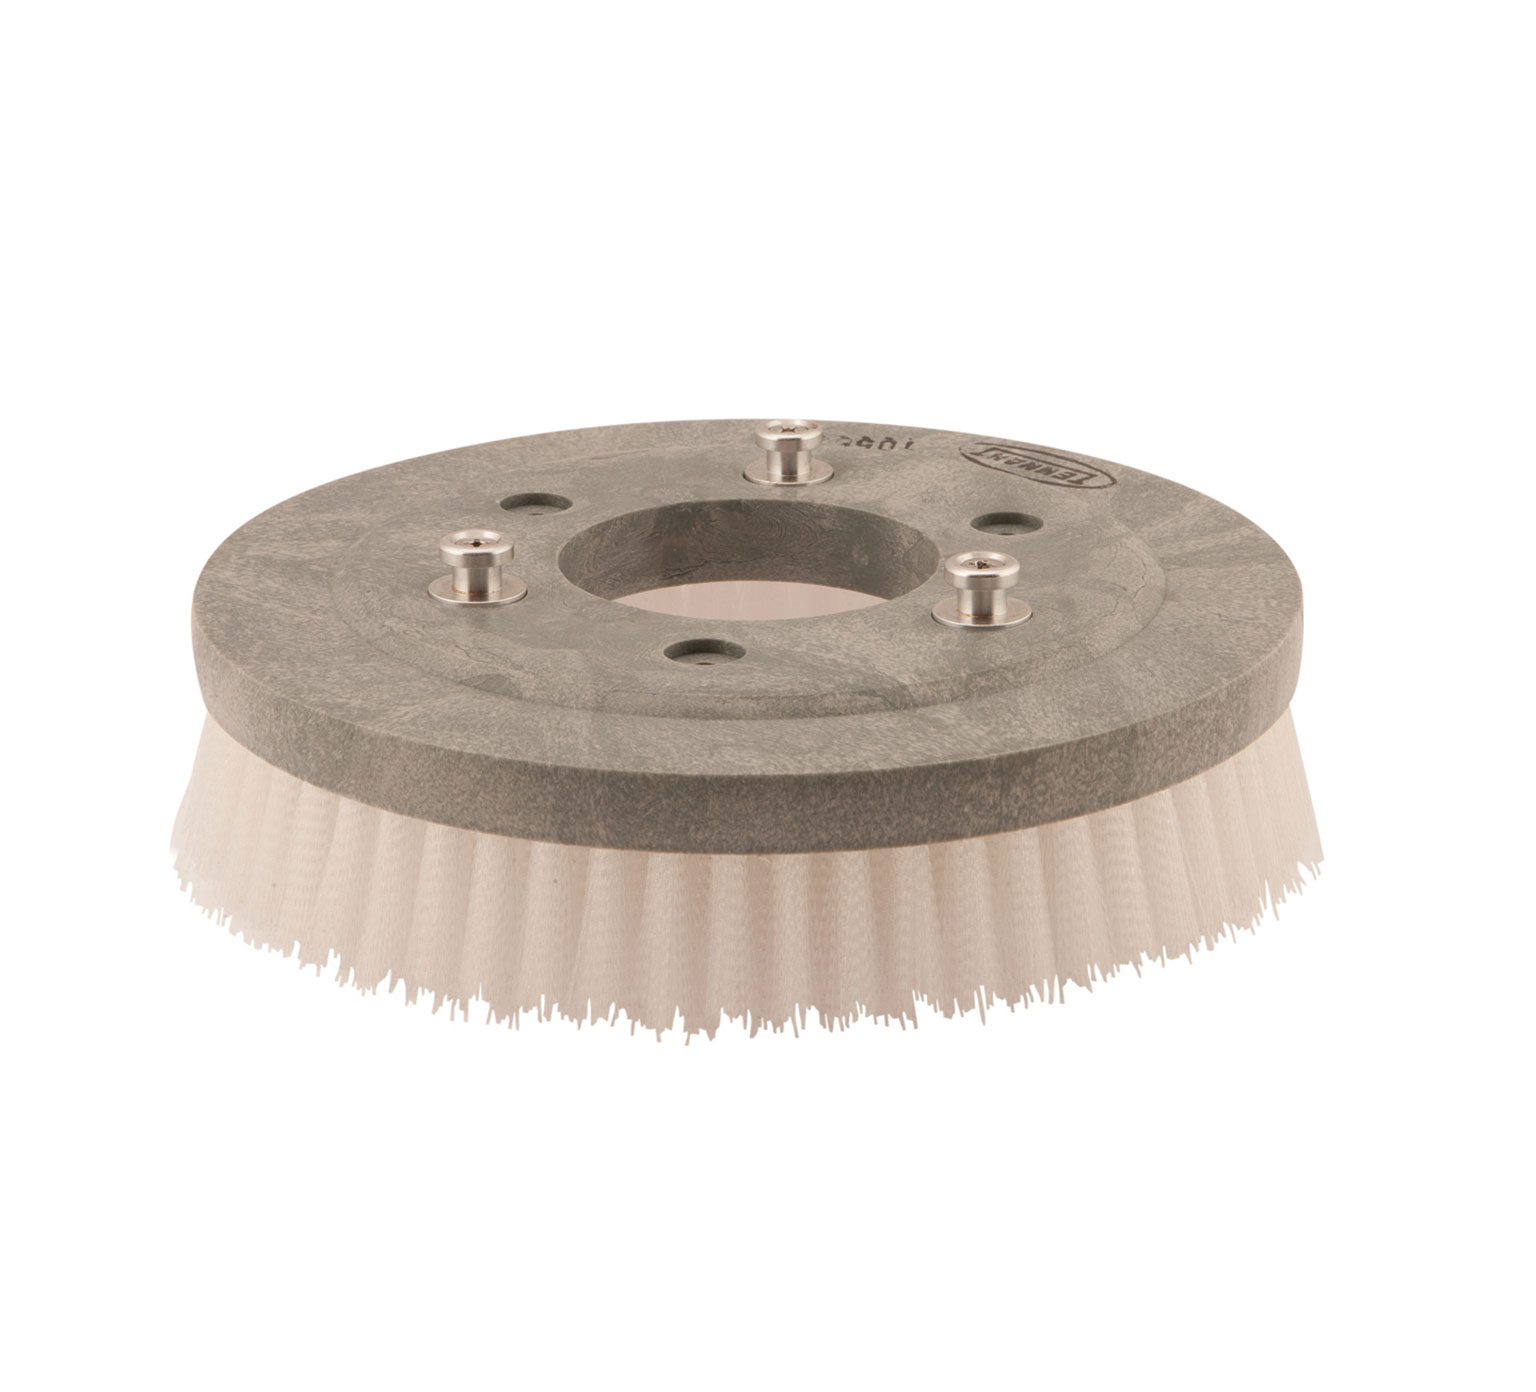 Driver Assembly Pad 43cm Brush for sale online Tennant 1016813 